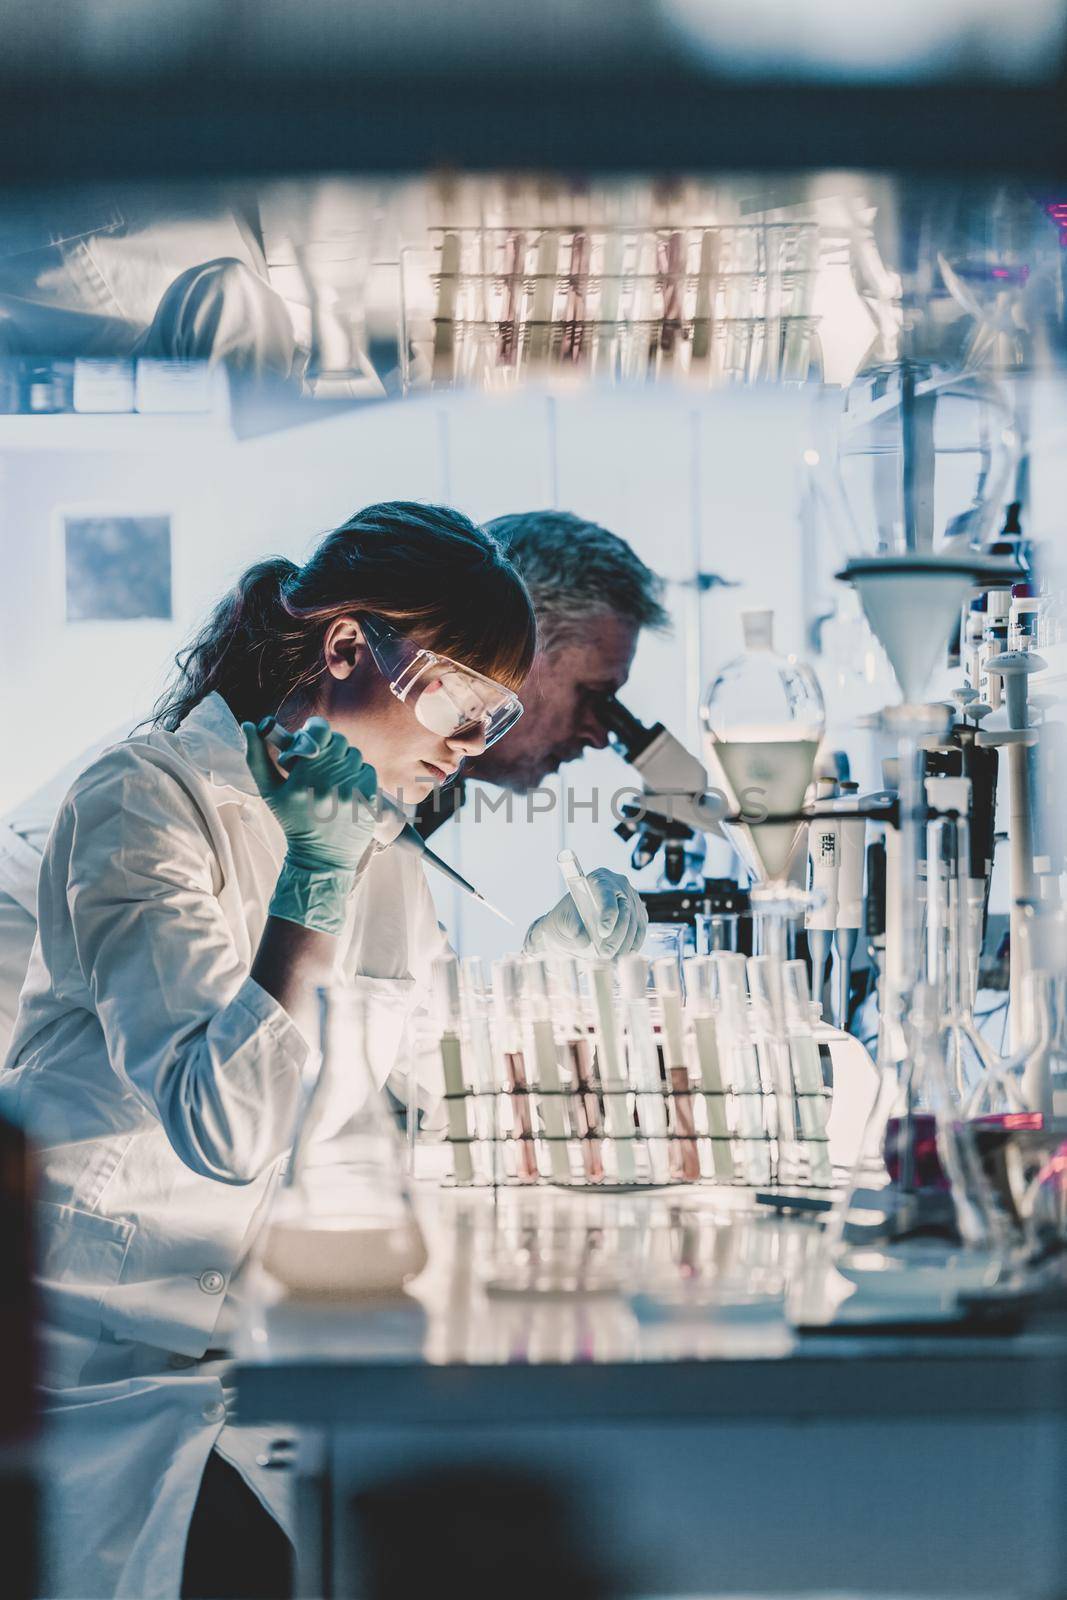 Health care researchers working in life science laboratory. Young female research scientist and senior male supervisor preparing and analyzing microscope slides in research lab.